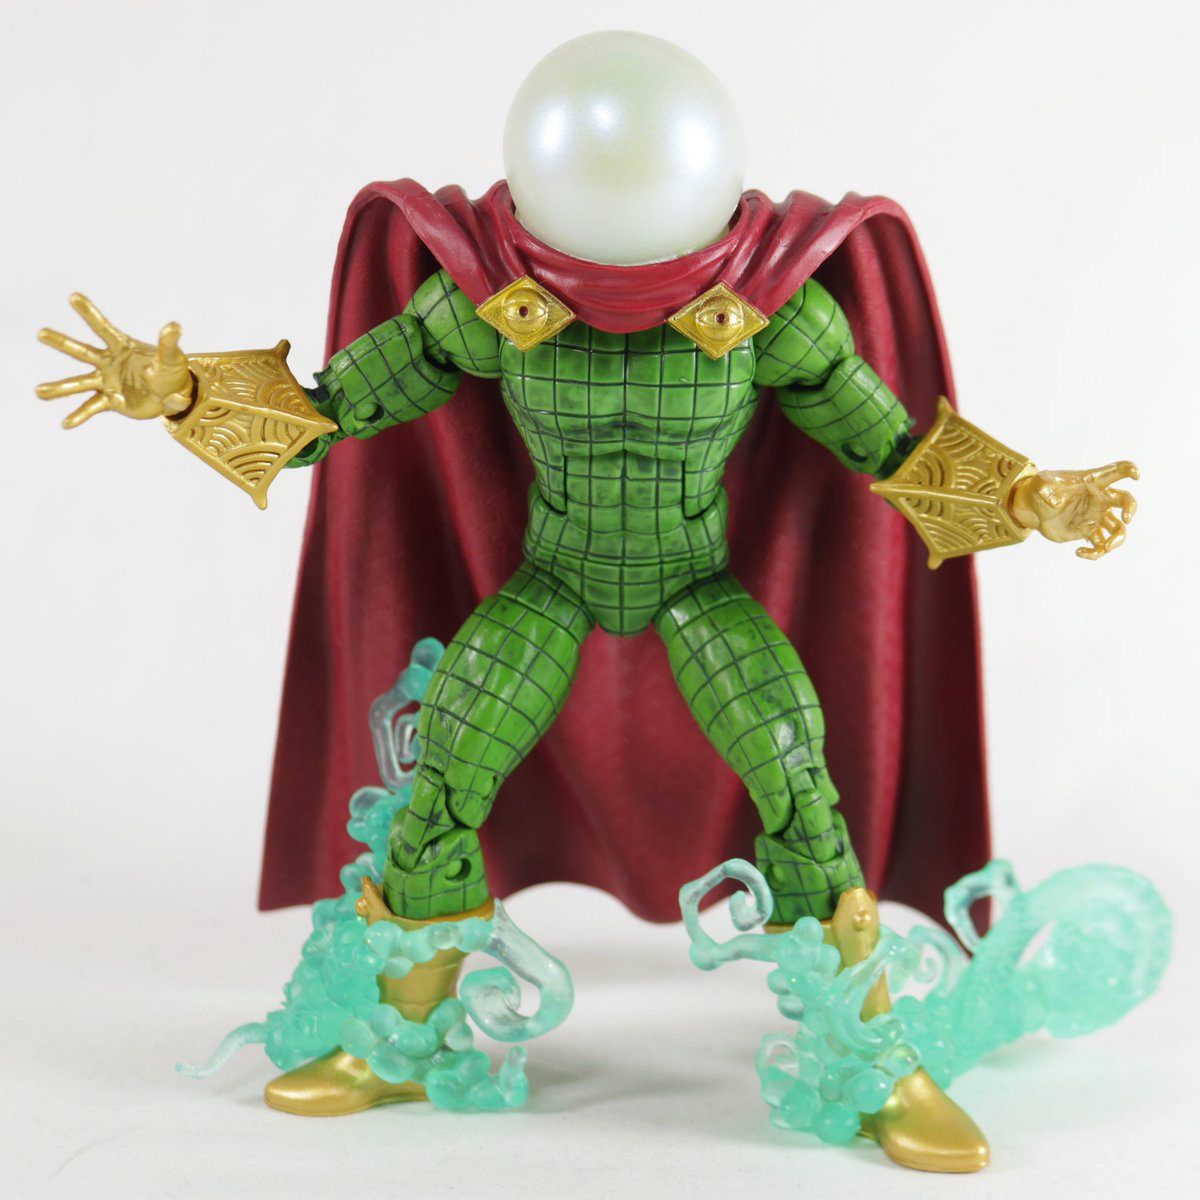 Just opened up this #MavelLegends #Retro #Mysterio & this is a massive upgrade to the previous version, full review & comparison on my channel now! ⬇️⬇️ #spiderman 
youtu.be/m0kj09H-pgM